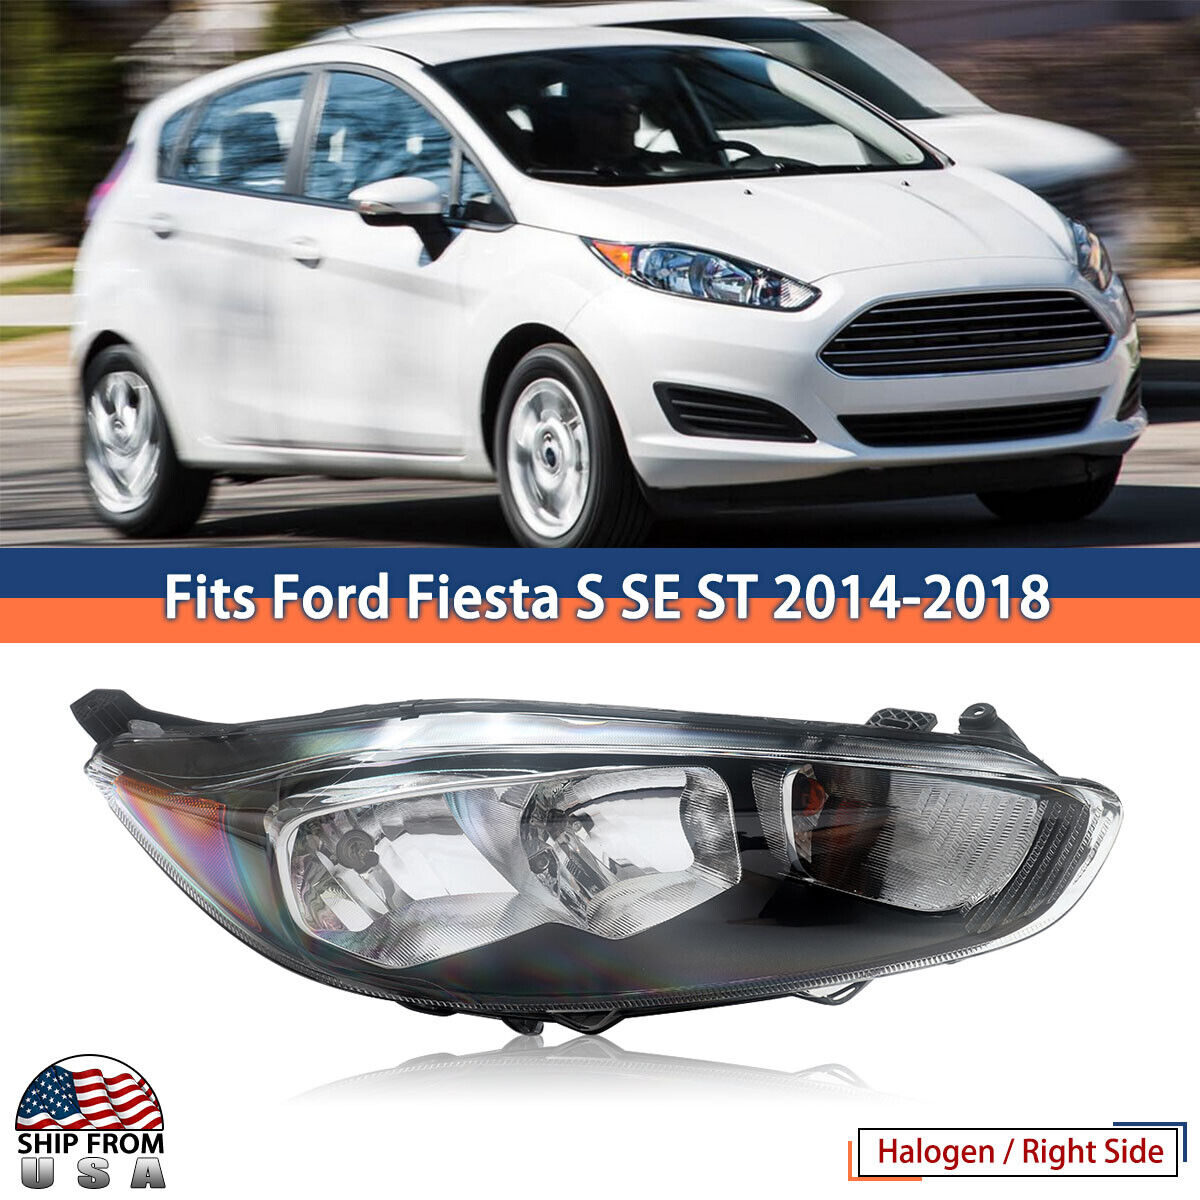 For 2014-2018 Ford Fiesta S SE ST Headlight Headlamp Replacement Right Side RH